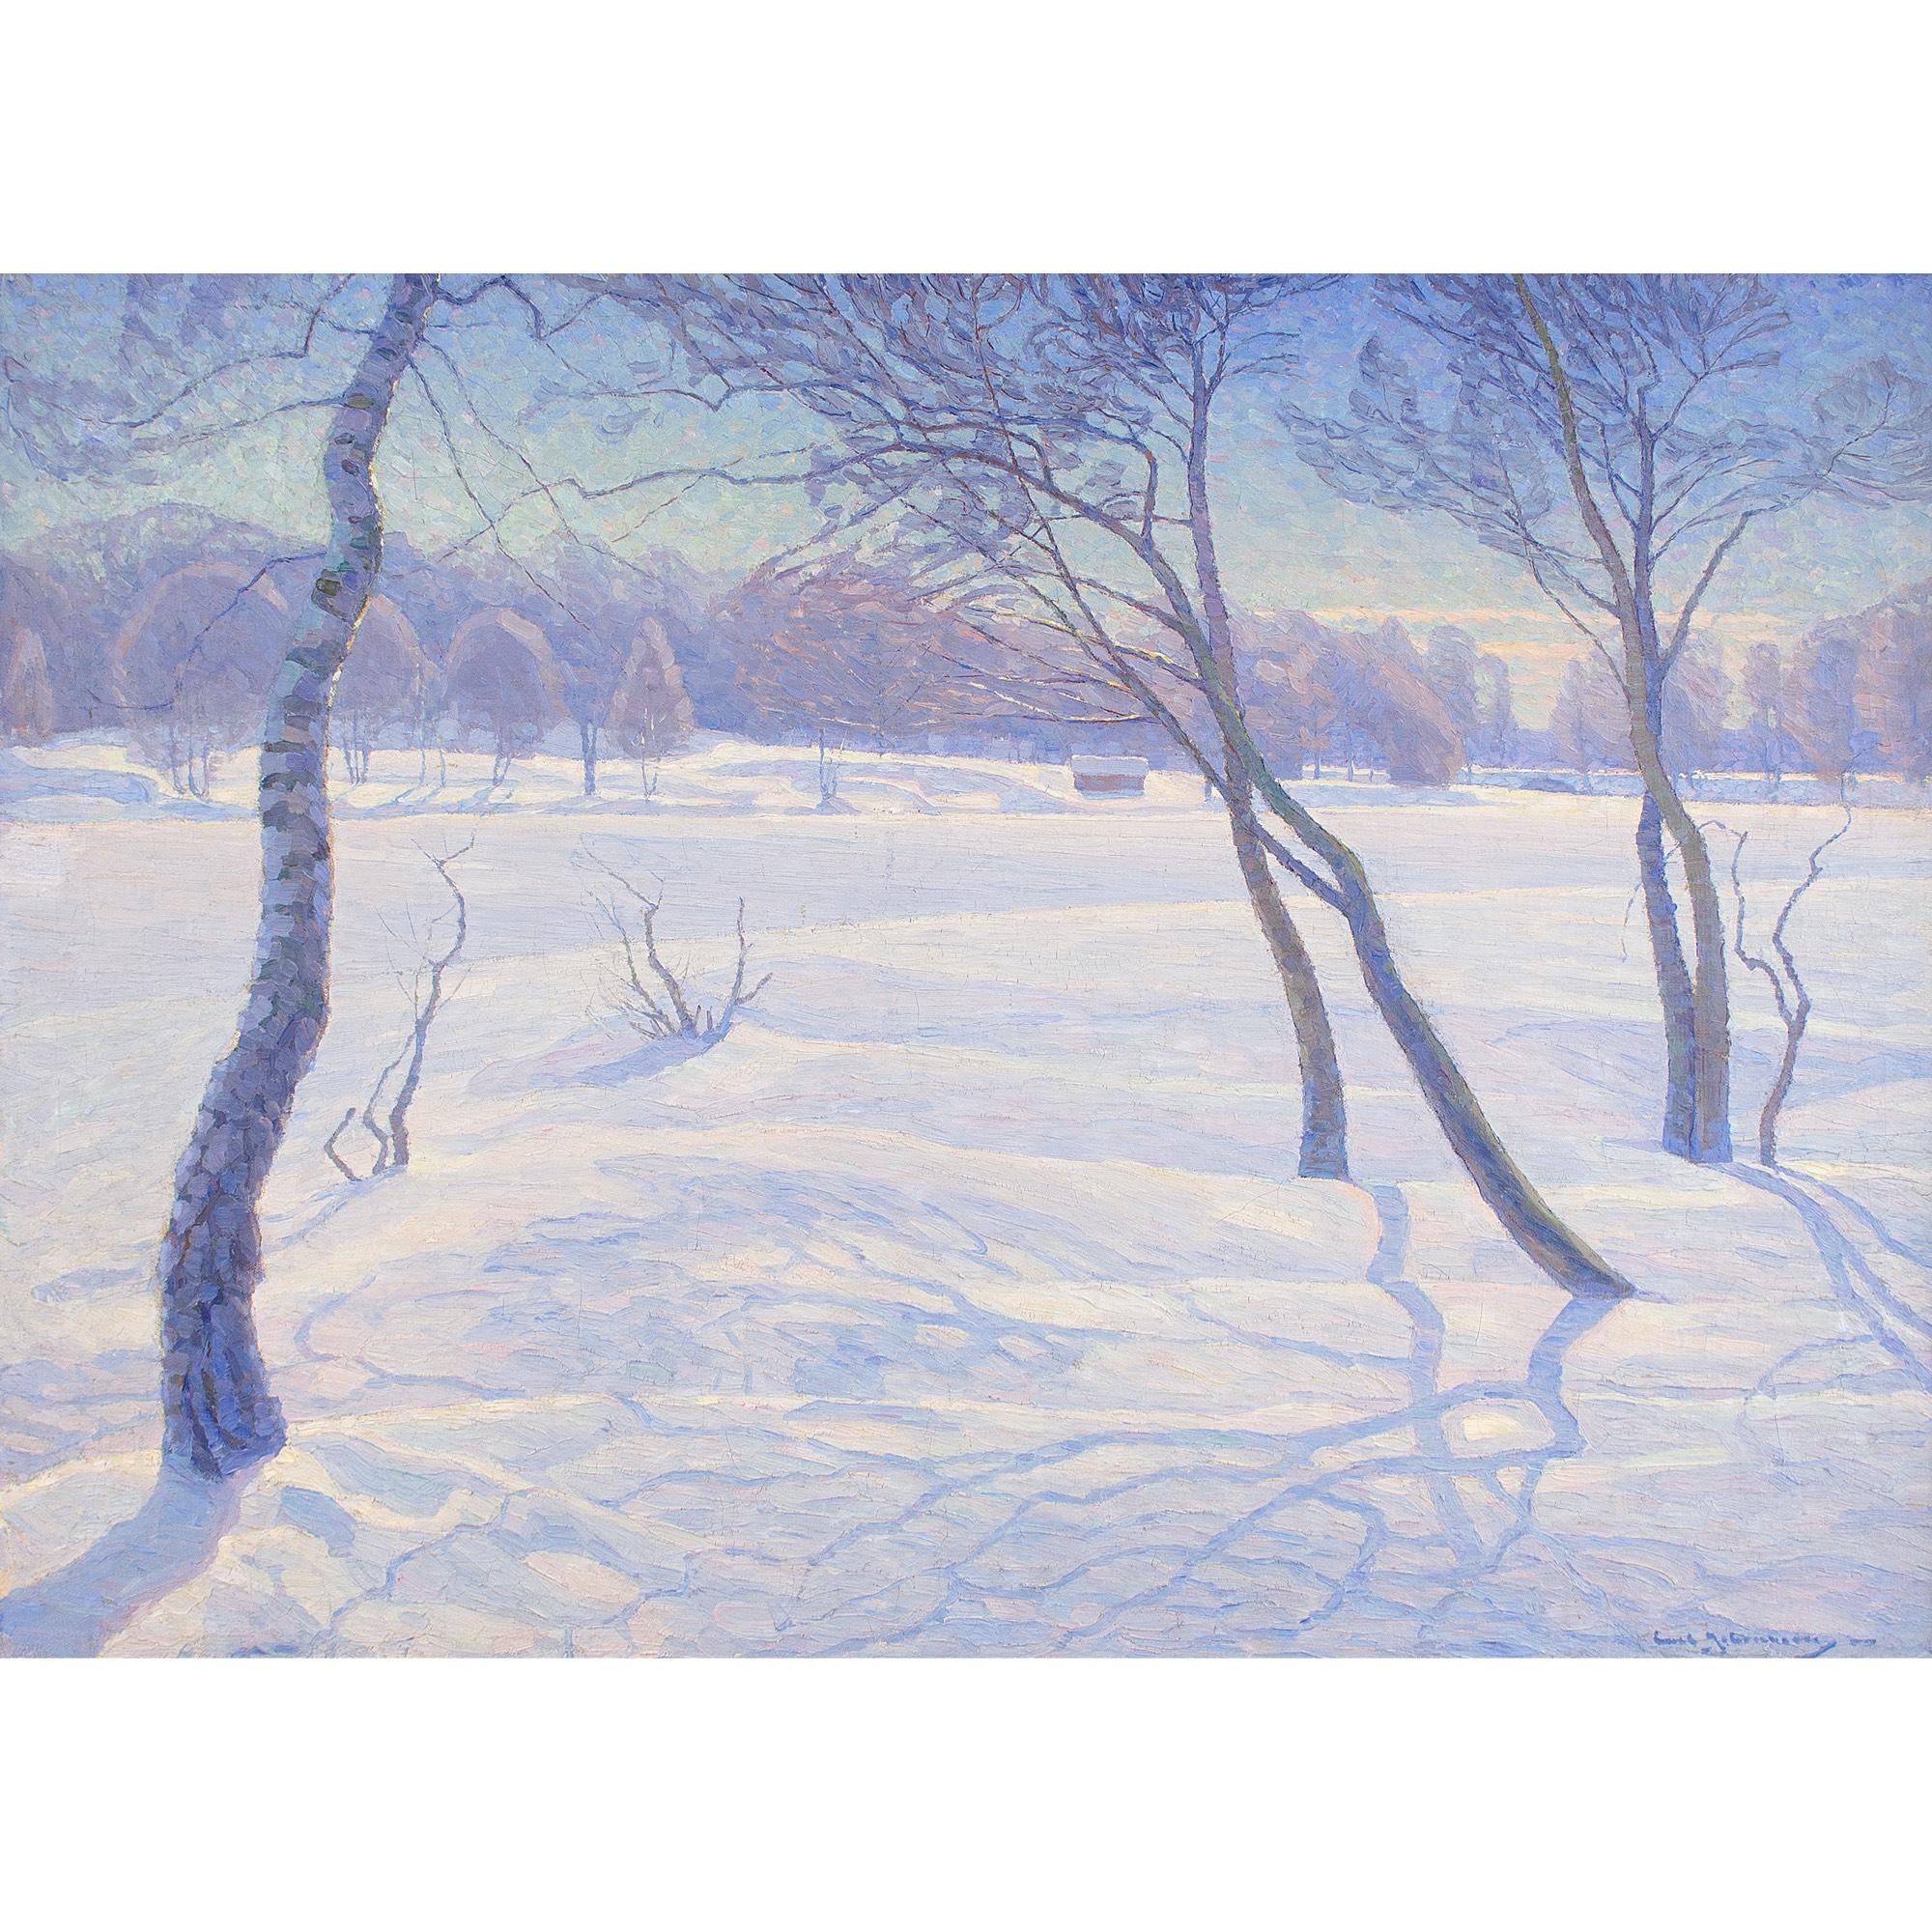 This early 20th-century oil painting by Swedish artist Carl Johansson (1863-1944) depicts a wintery view in Sollentunaholm, near Stockholm, Sweden.

A contorted birch, almost serpentine, leans towards other sinuous trees creating a visual gateway